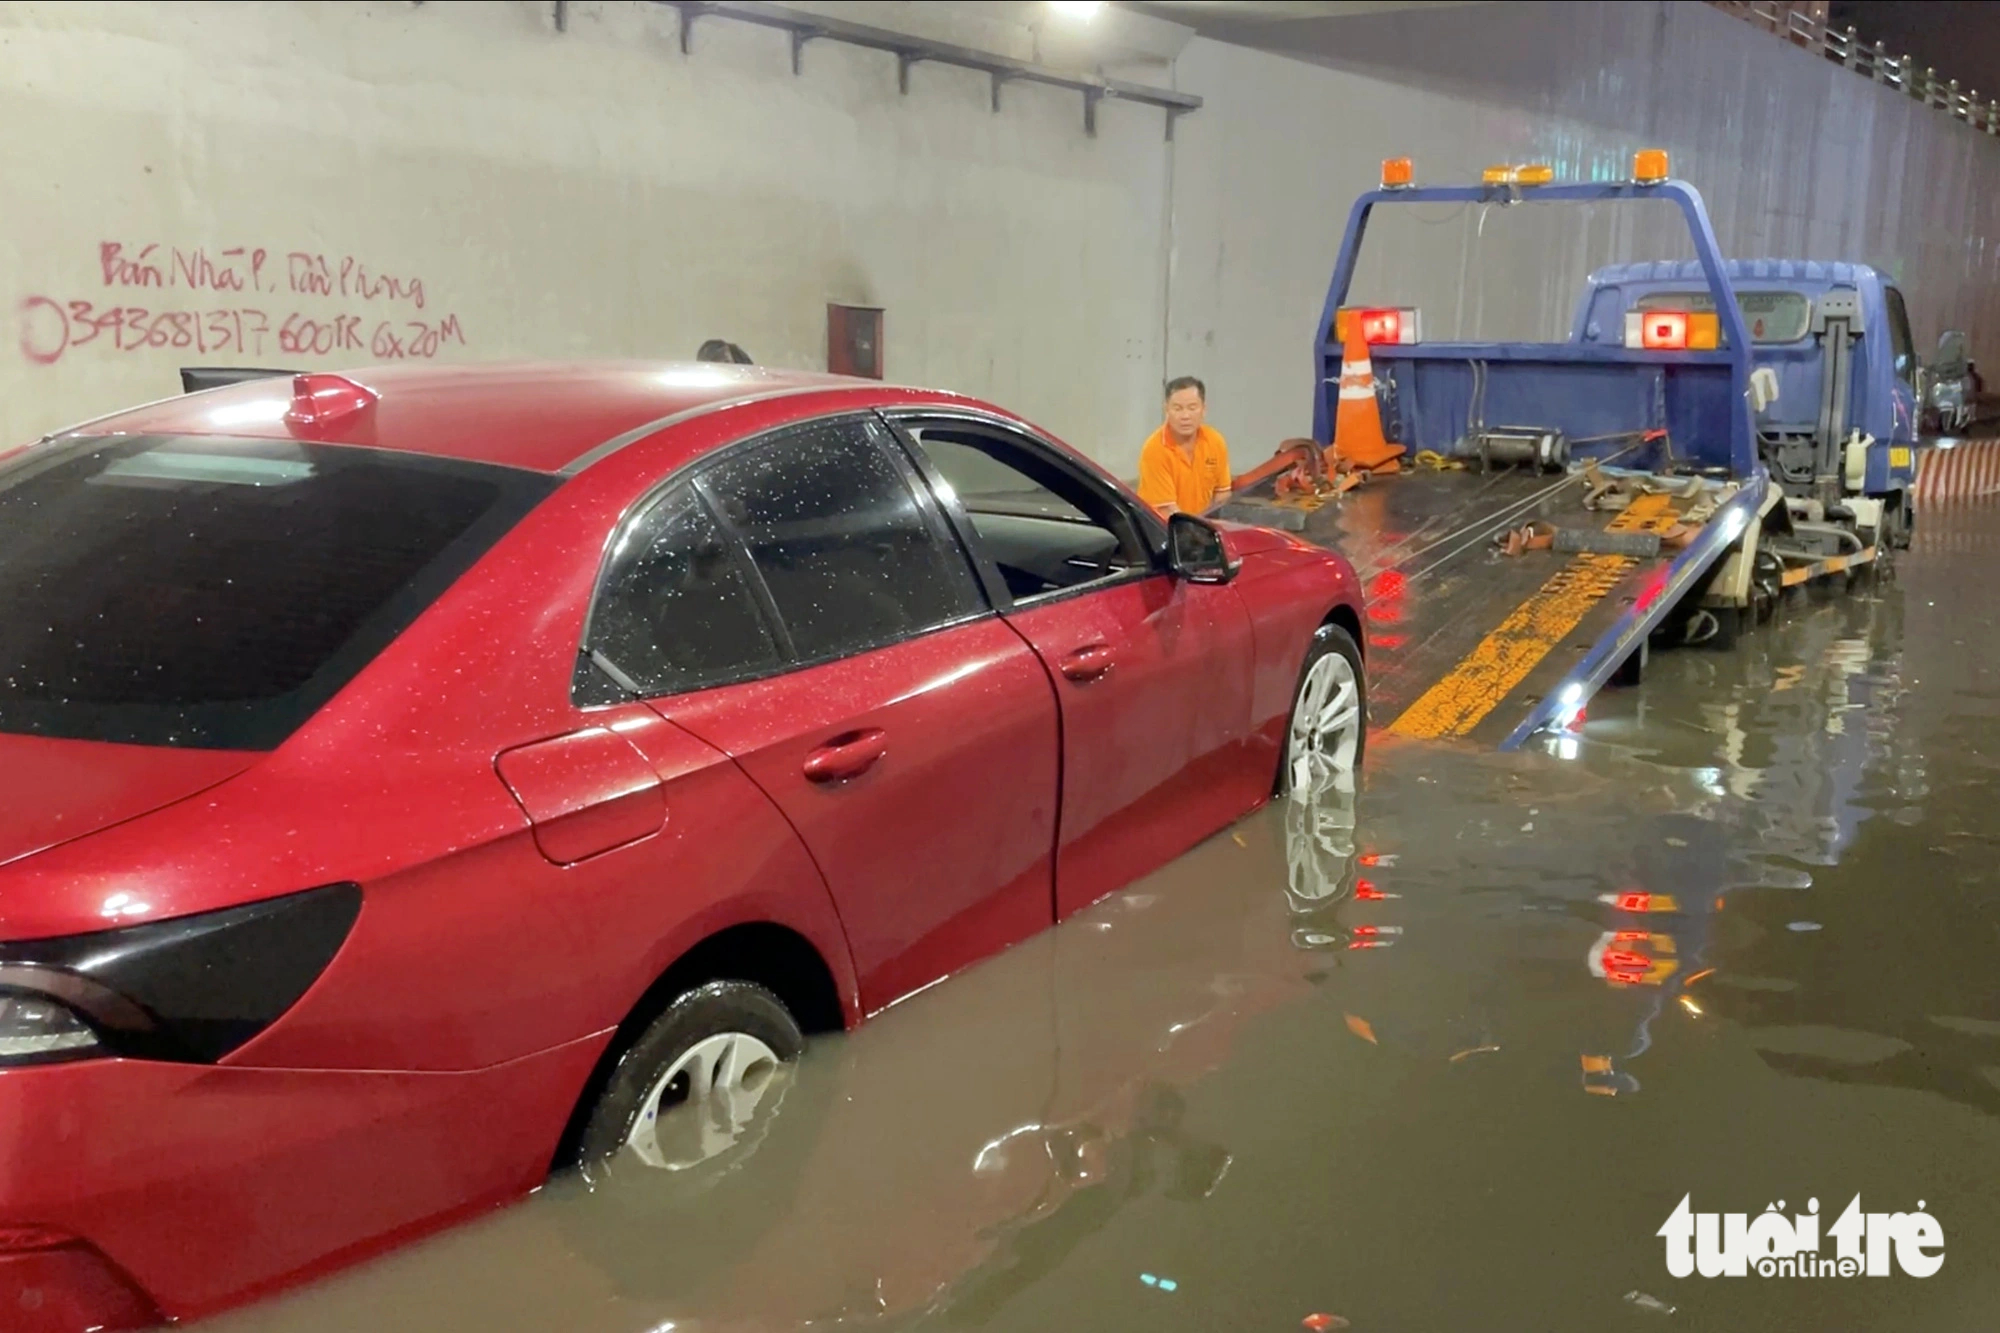 A rescue vehicle tows a car after it was submerged under water in the Tan Phong Tunnel in Bien Hoa City, Dong Nai Province, southern Vietnam on July 13, 2023. Photo: An Binh / Tuoi Tre